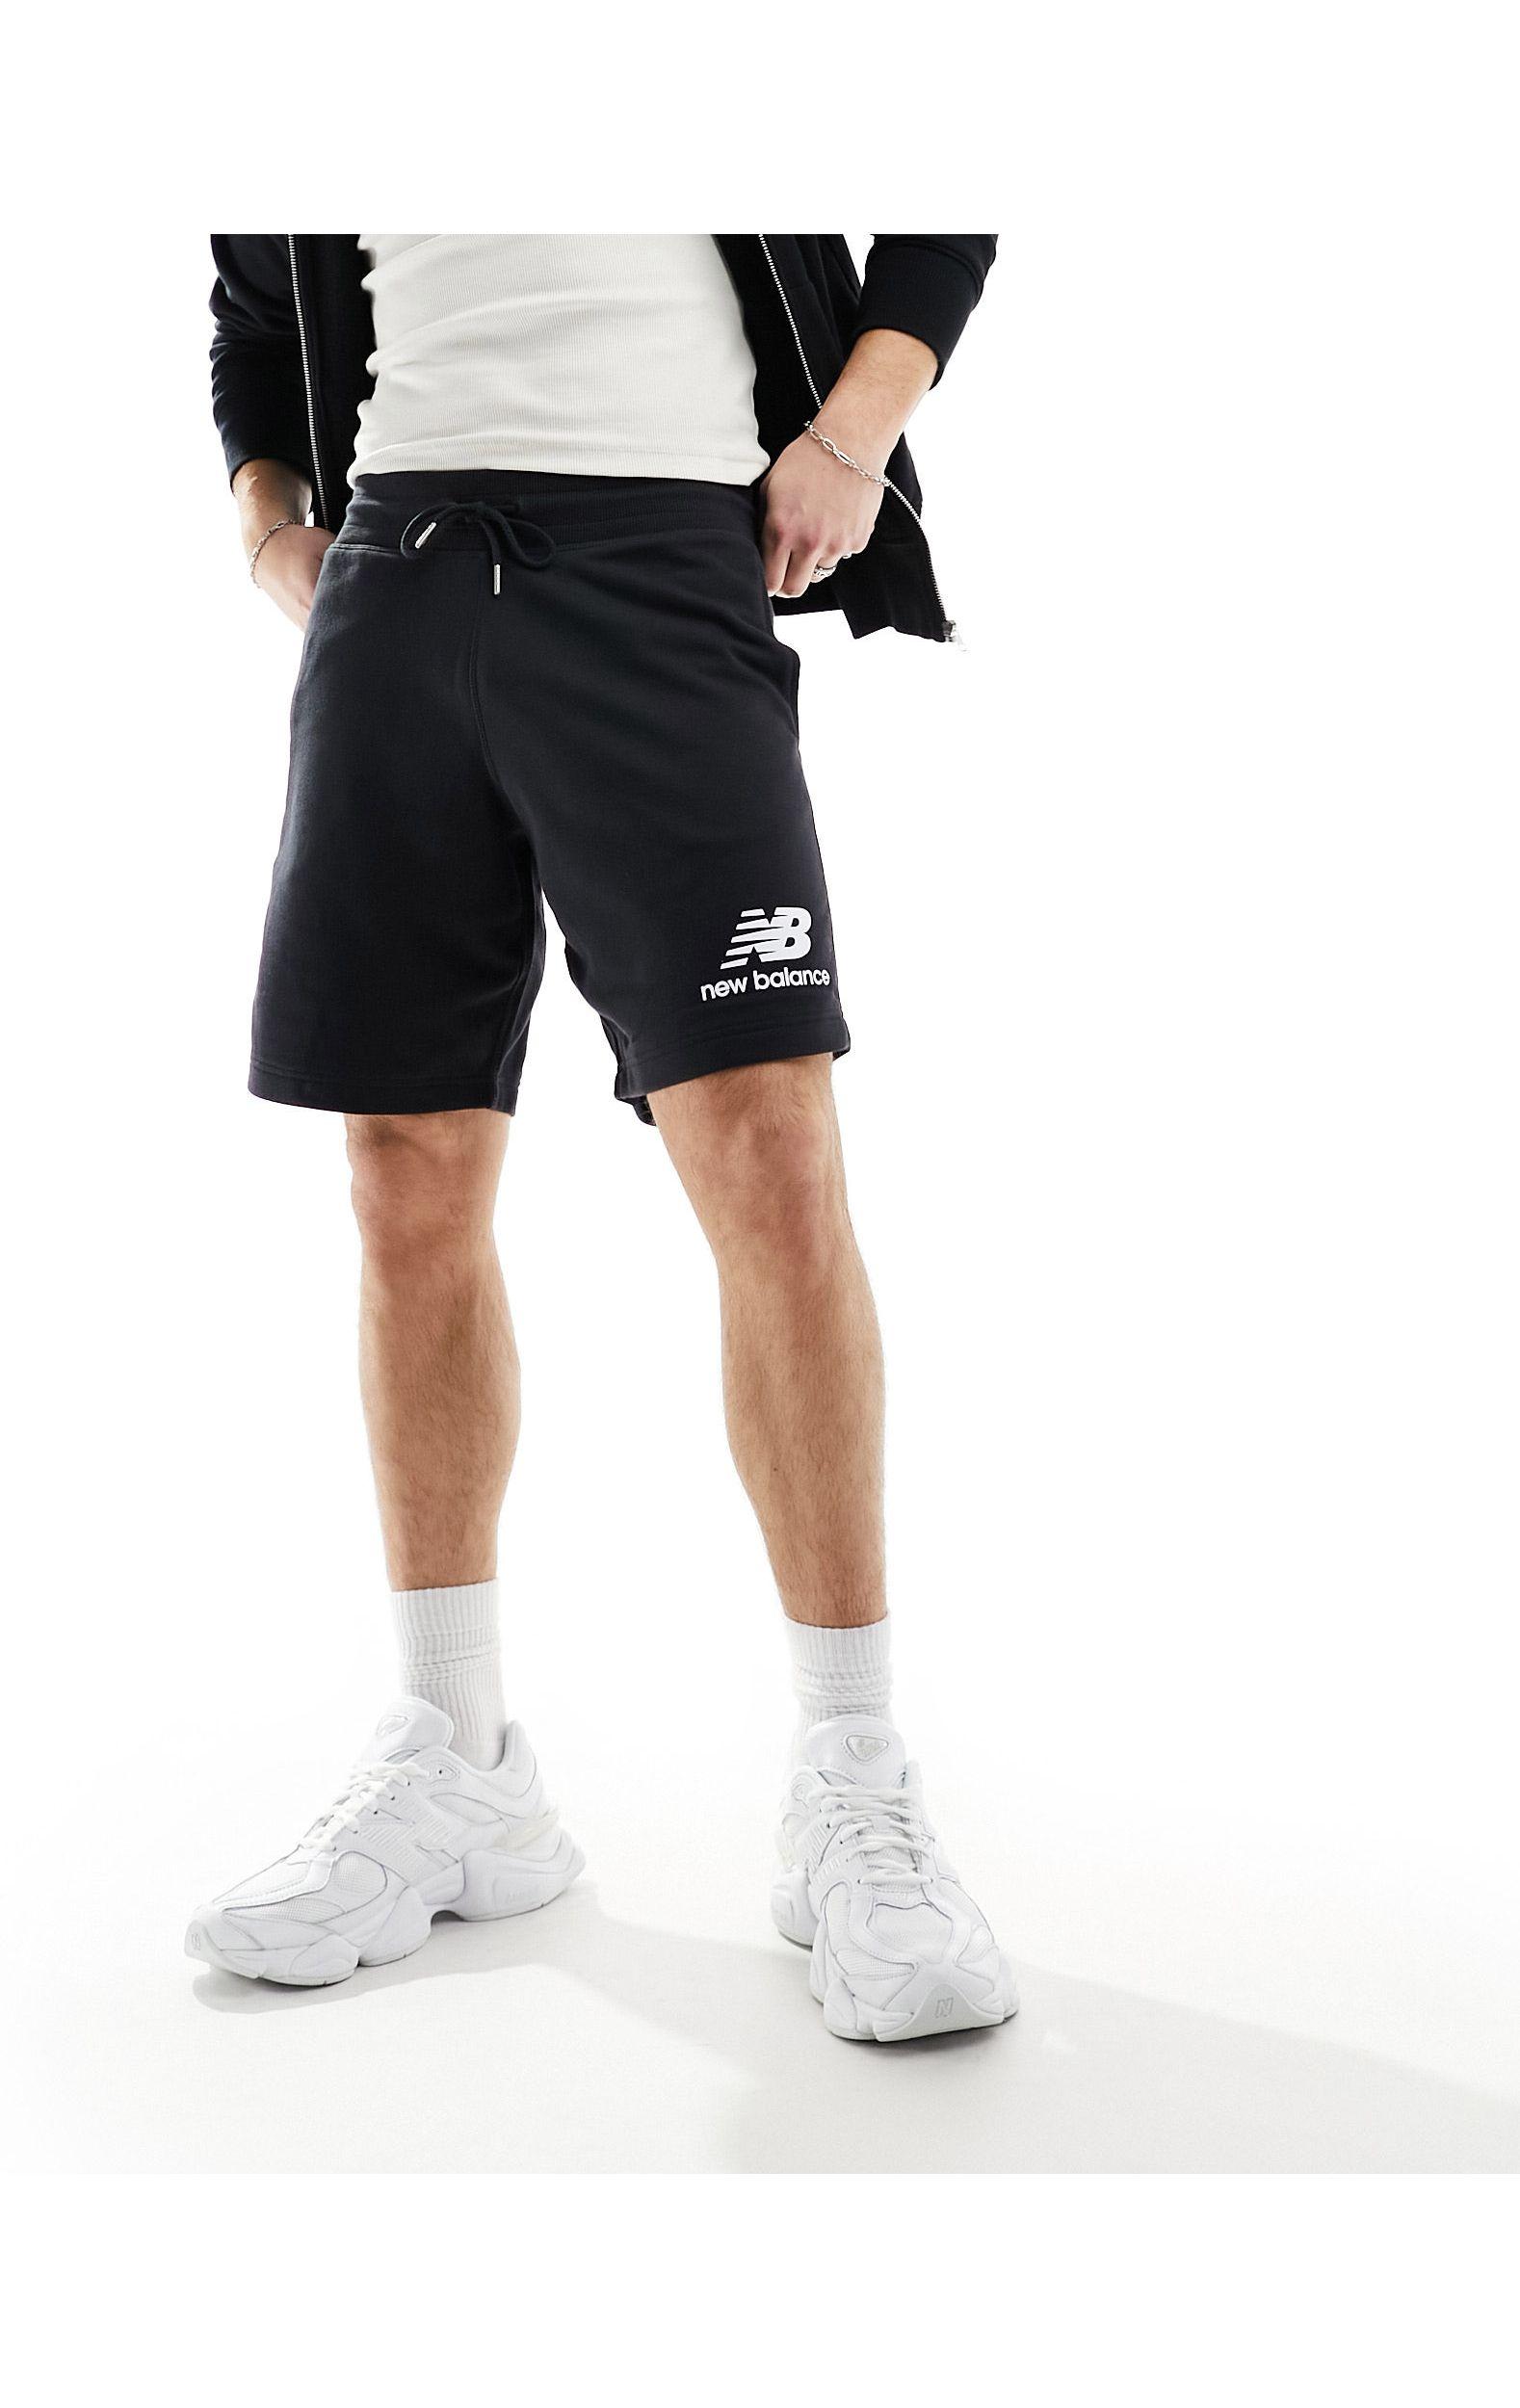 New Lyst Black for Balance With in Logo Active Shorts Sweat | Men